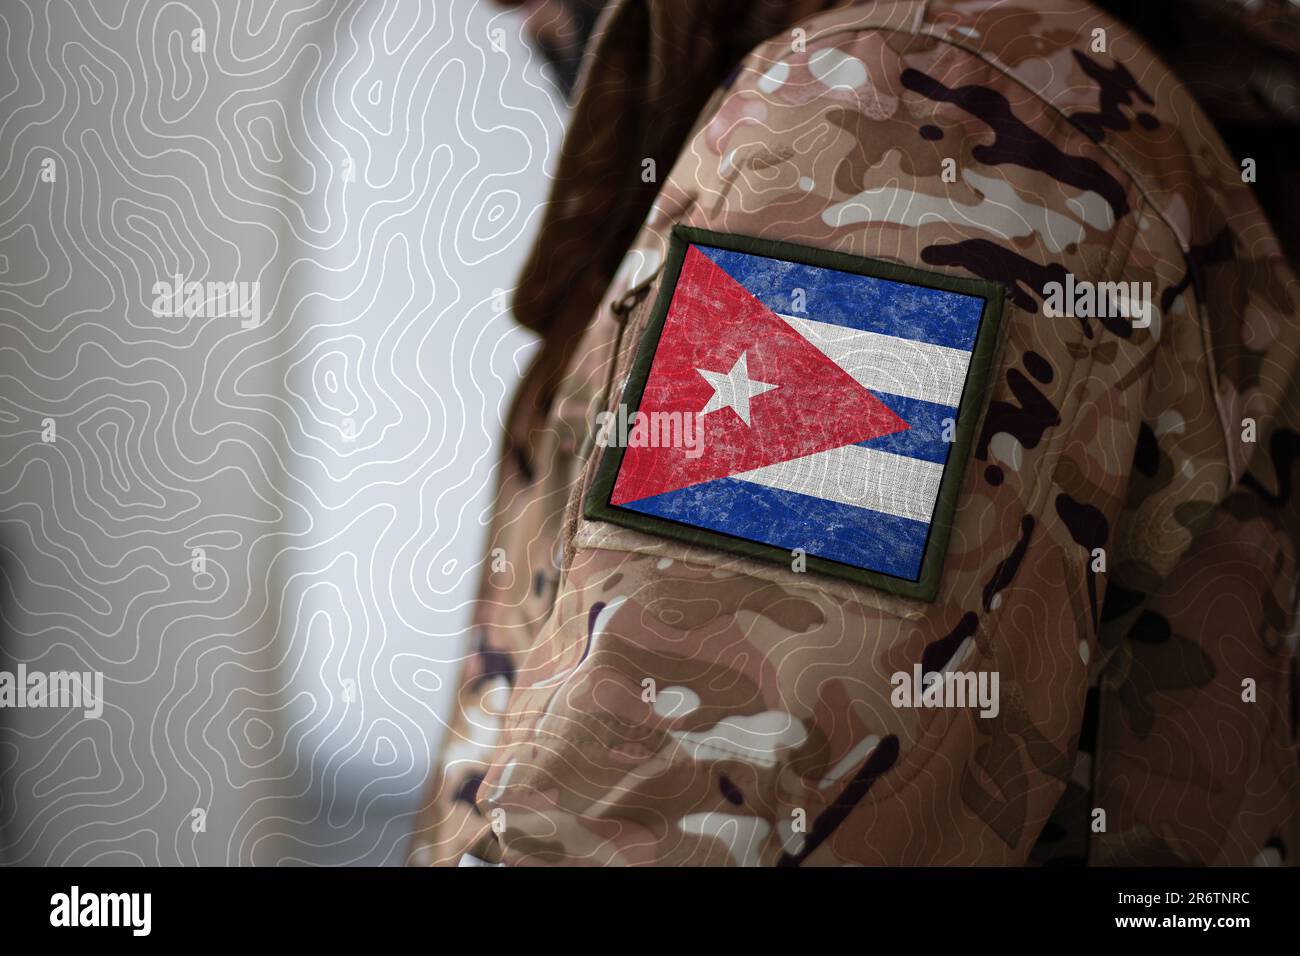 Cuba Soldier, Soldier with flag Cuba, Cuba flag on a military uniform, Cuba army, Camouflage clothing Stock Photo